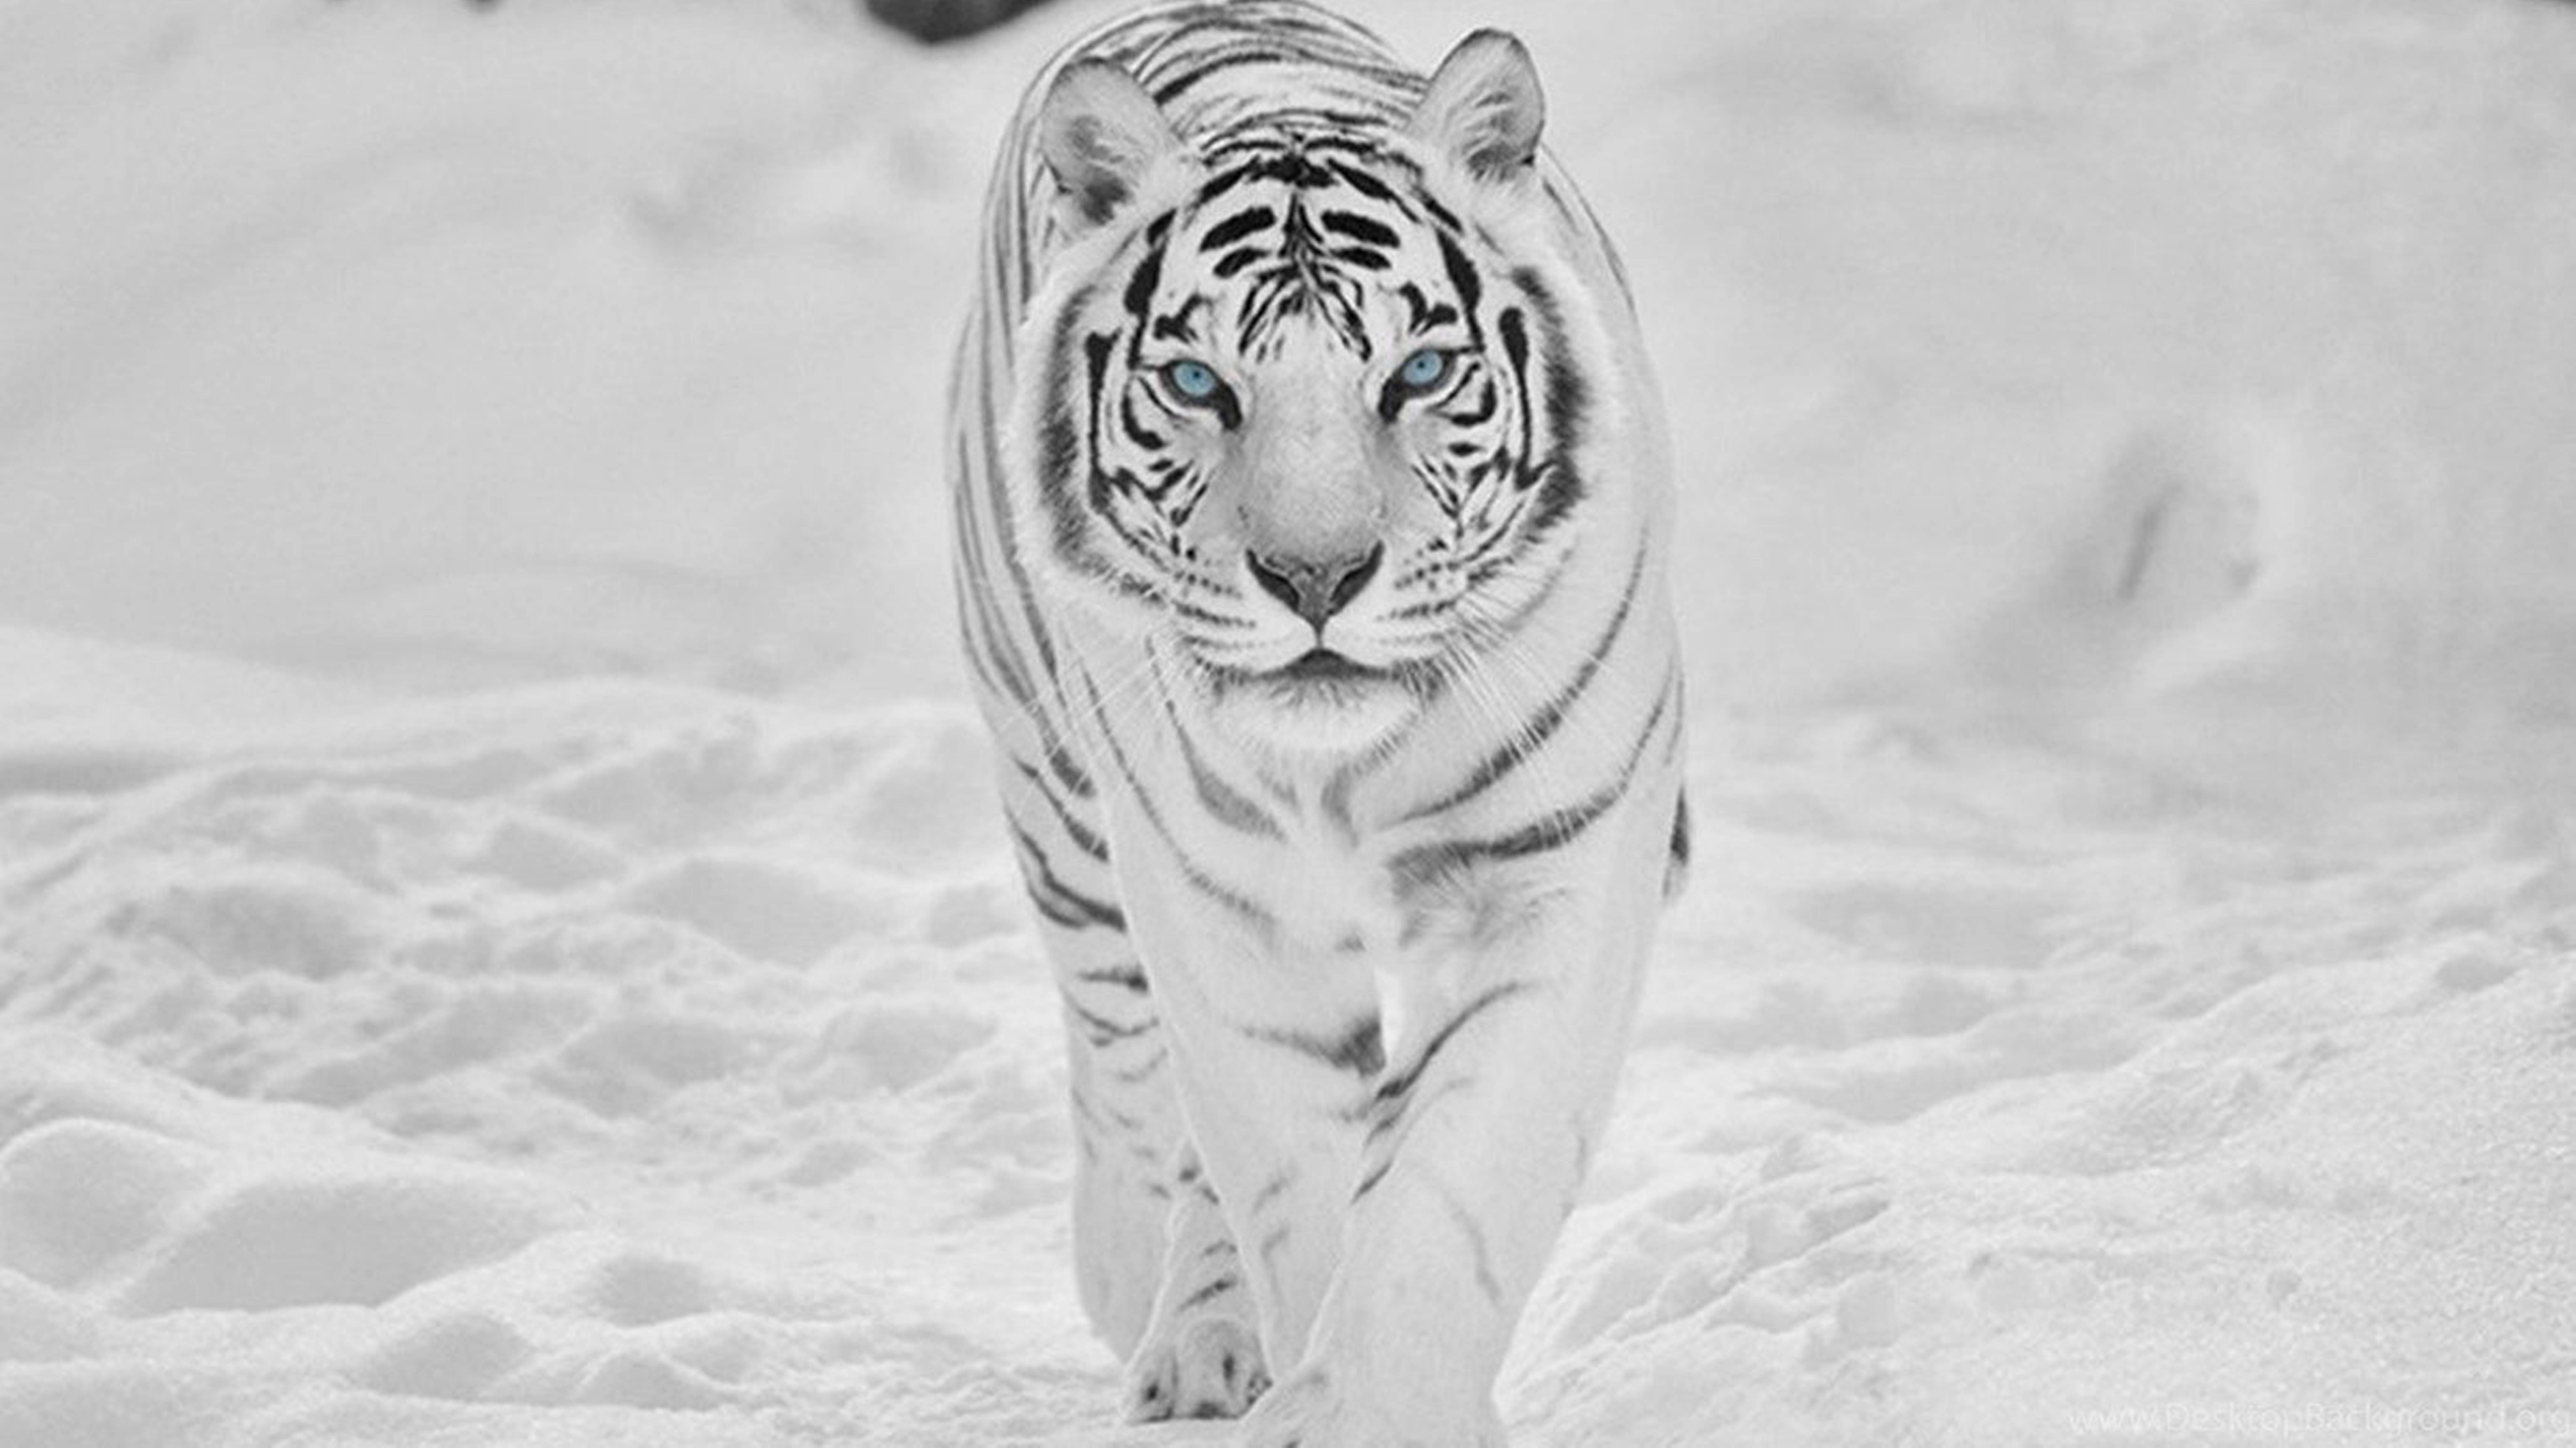 Majestic Tiger Roaming In Snowy Wilderness - 8k Uhd Picture